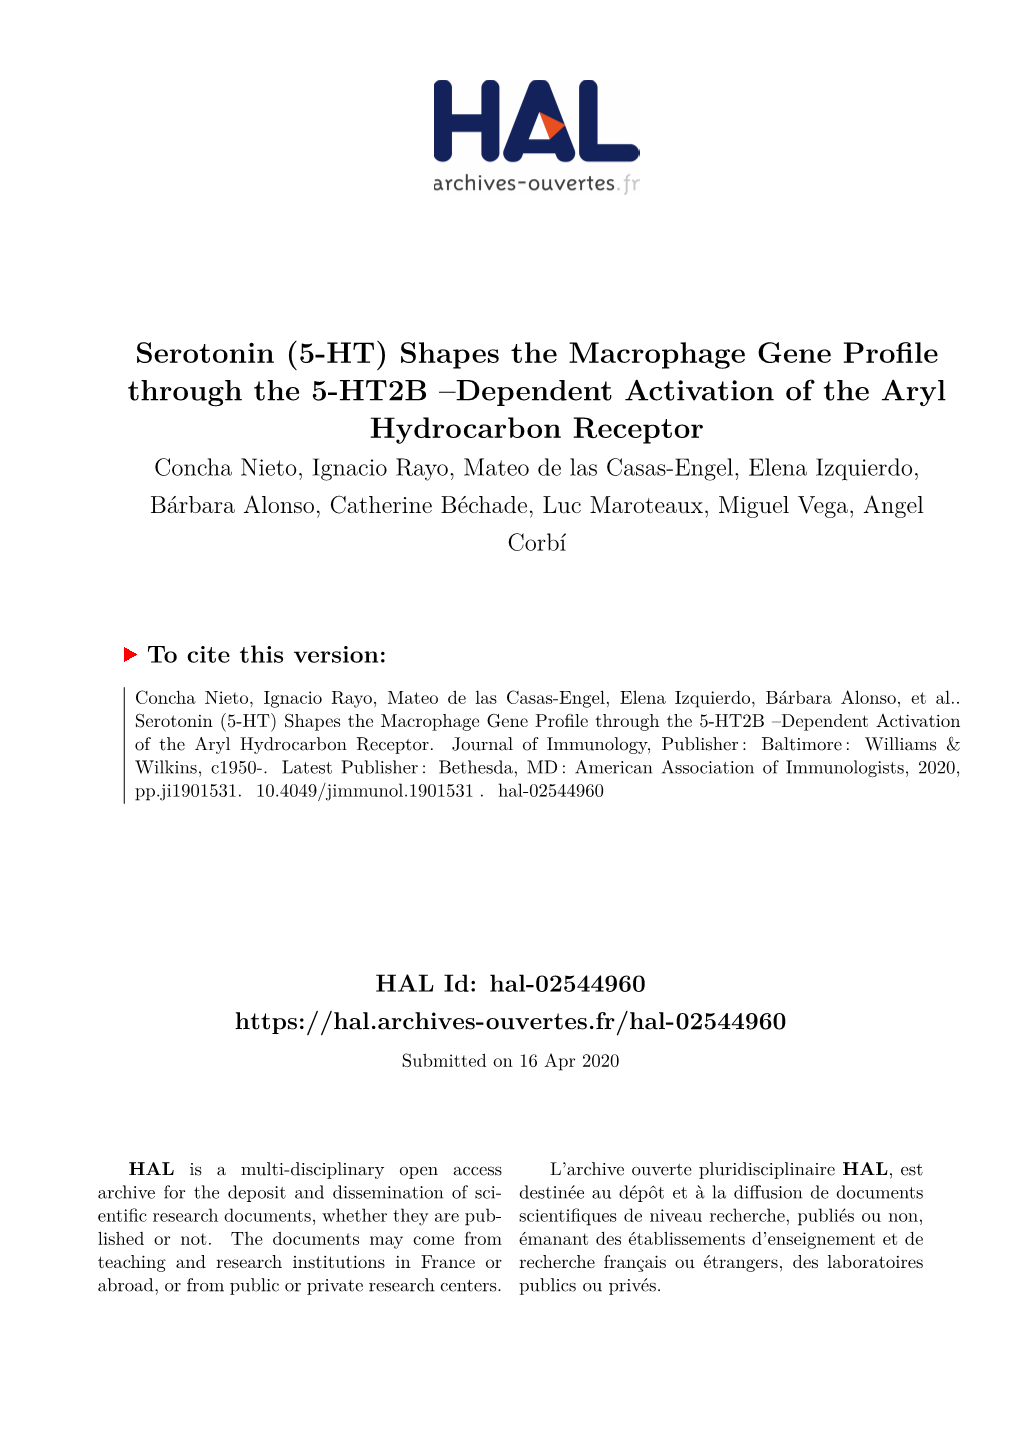 (5-HT) Shapes the Macrophage Gene Profile Through the 5-HT2B